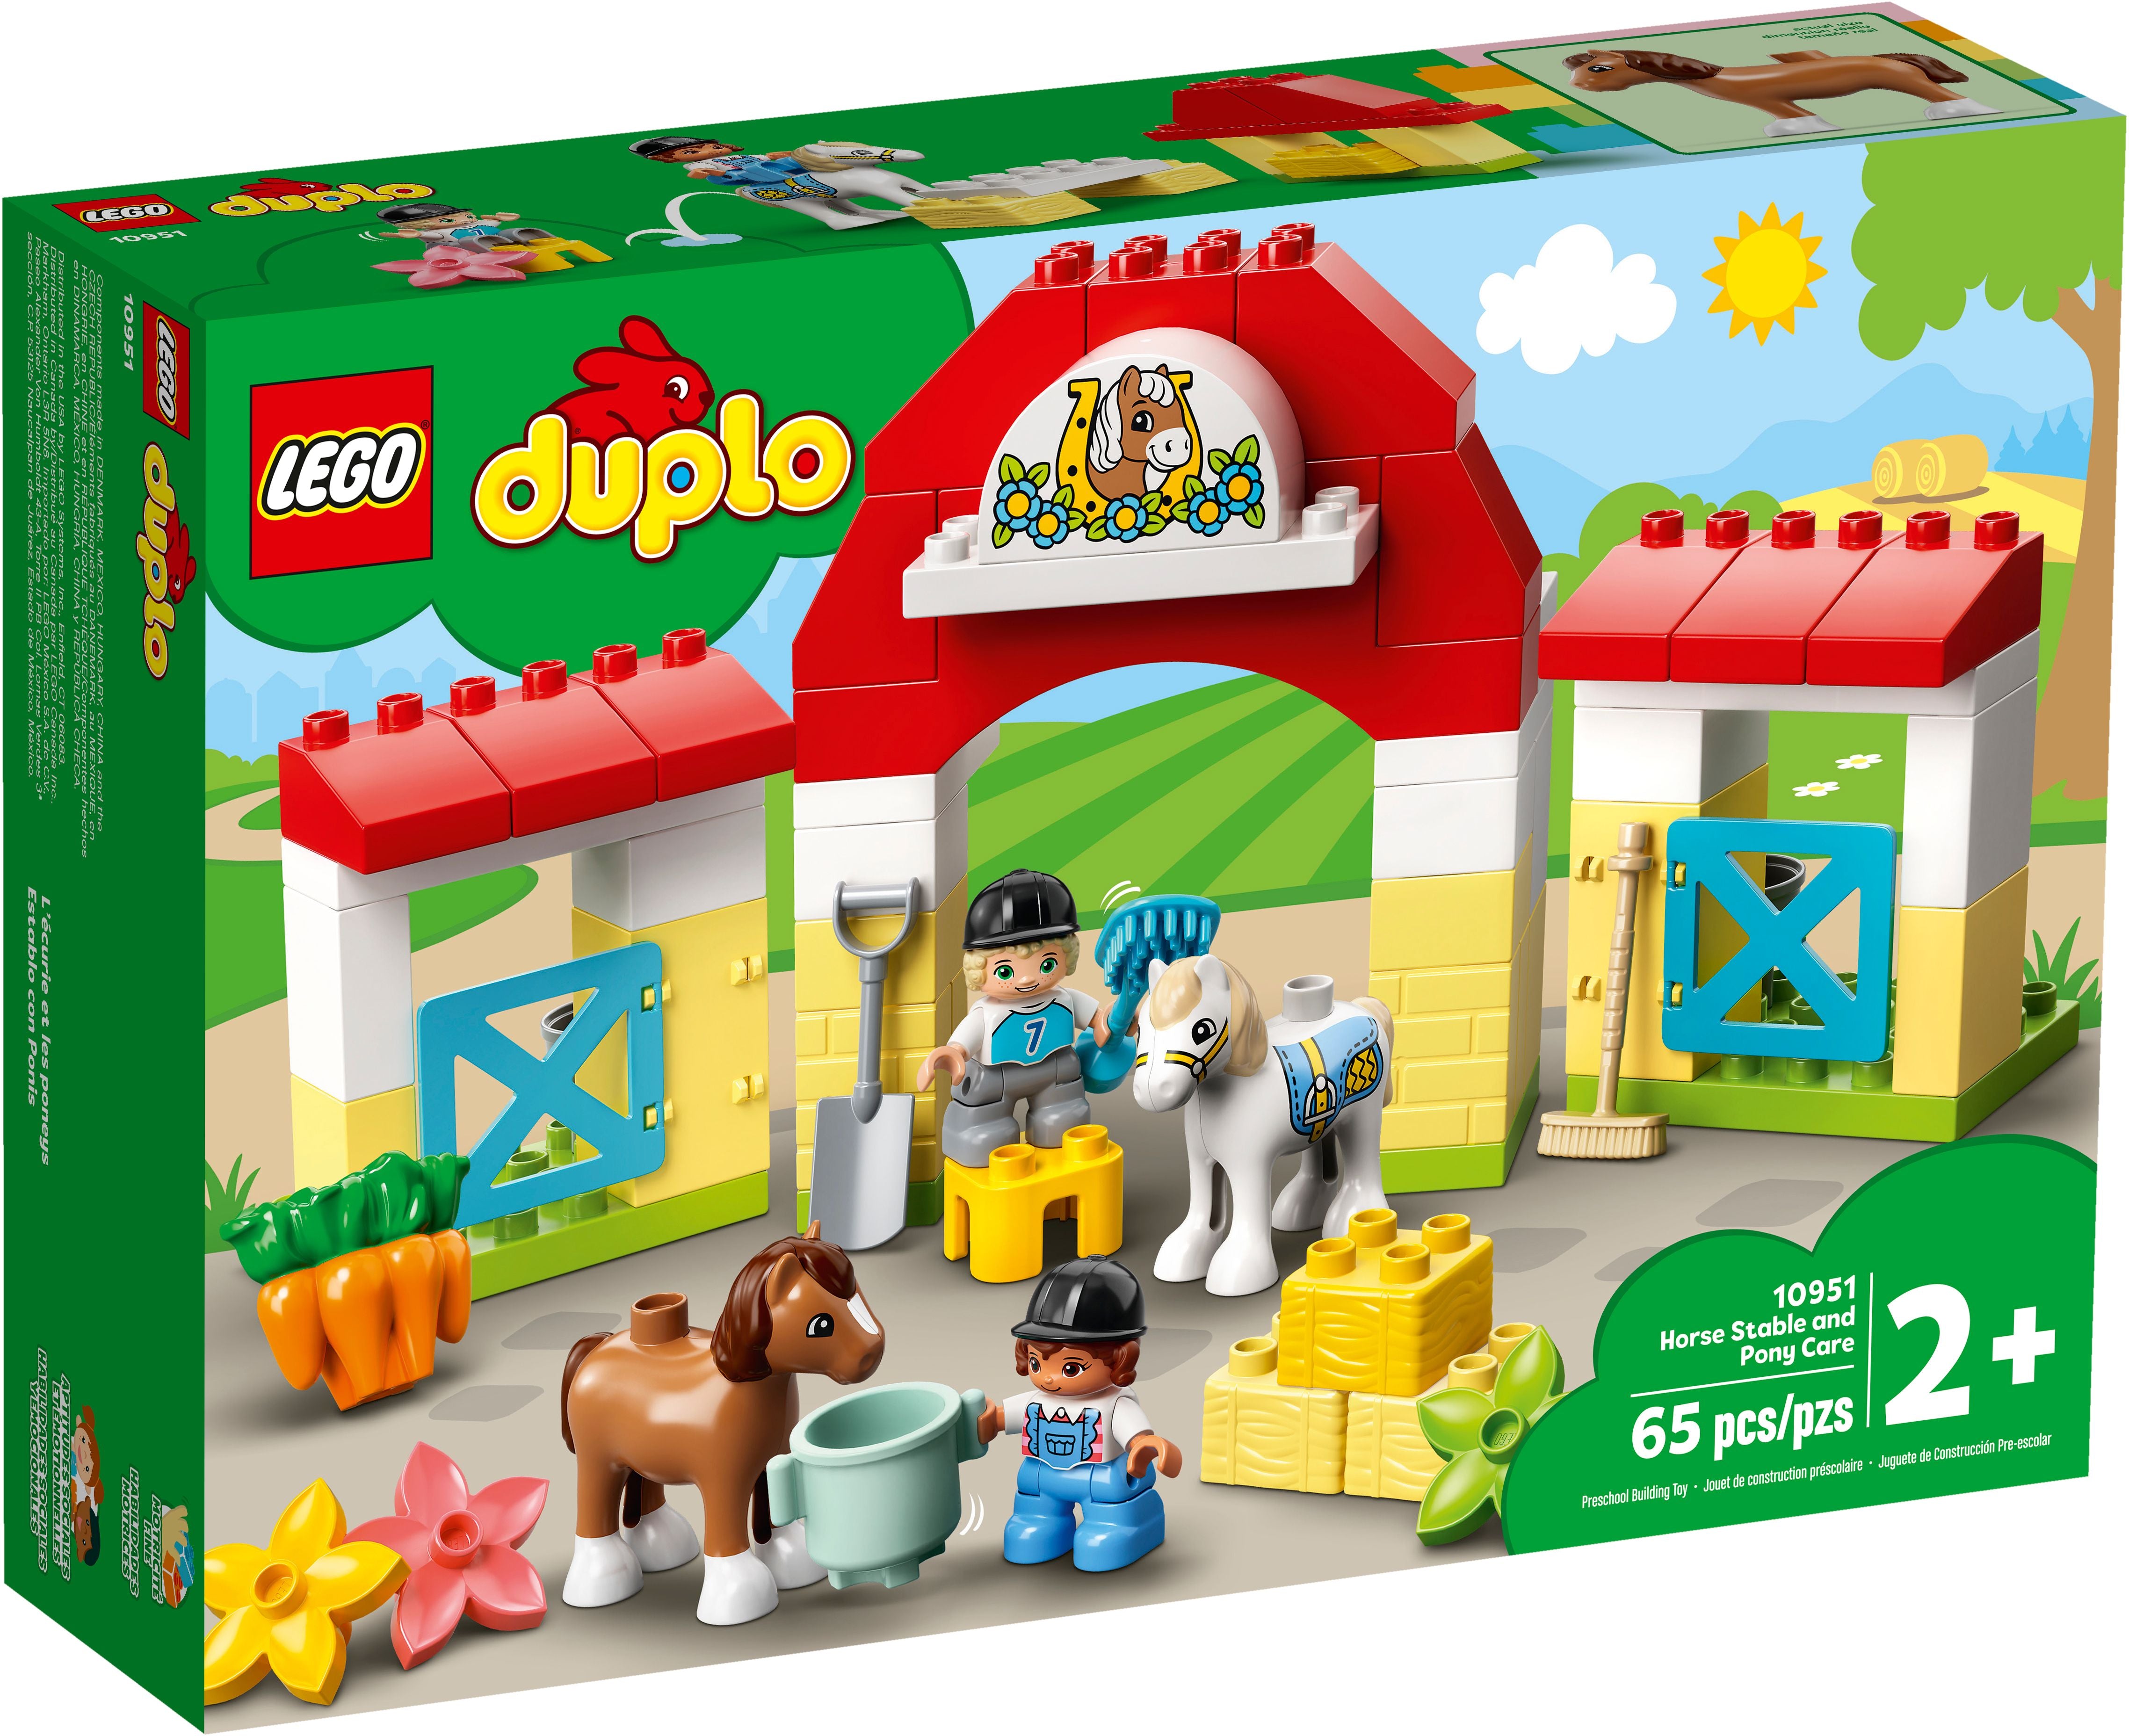 LEGO: DUPLO - Horse Stable and Pony Care